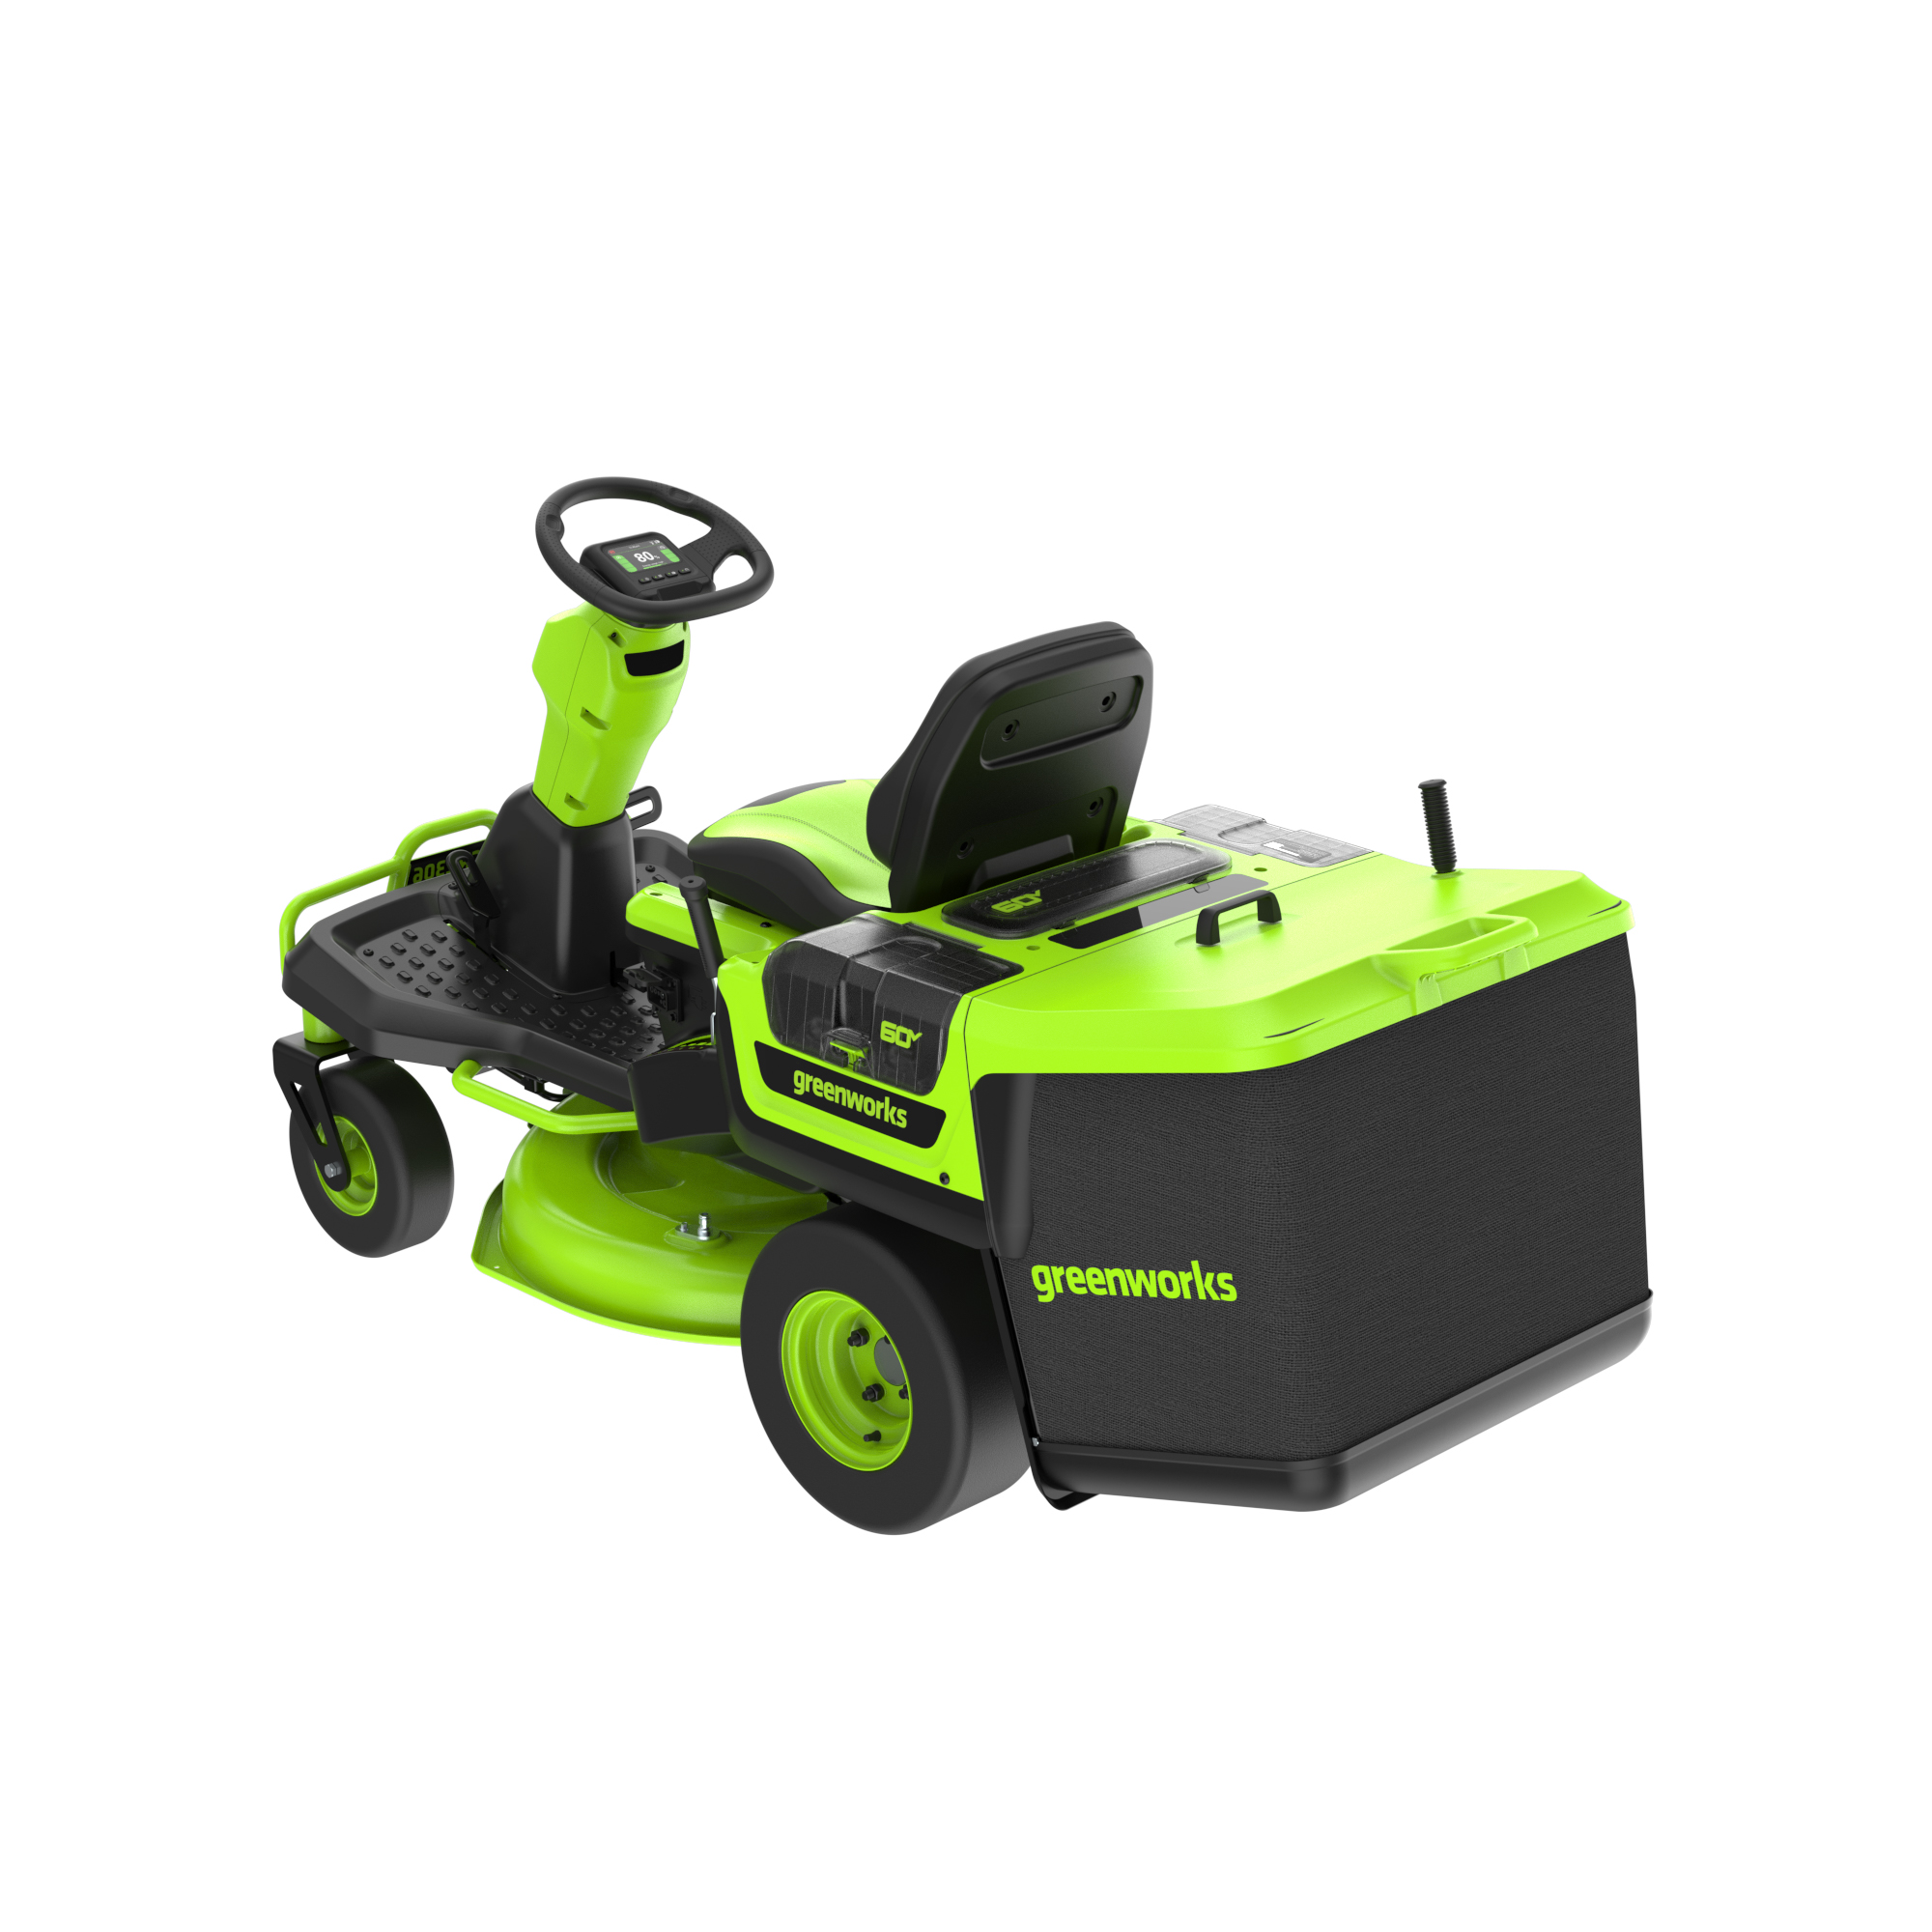 Greenworks 60V 30” CrossoverZ Zero Turn Riding Lawn Mower with (3) 8.0 Ah,  (1) 4.0 Ah Batteries & 600-Watt Charger 7422702